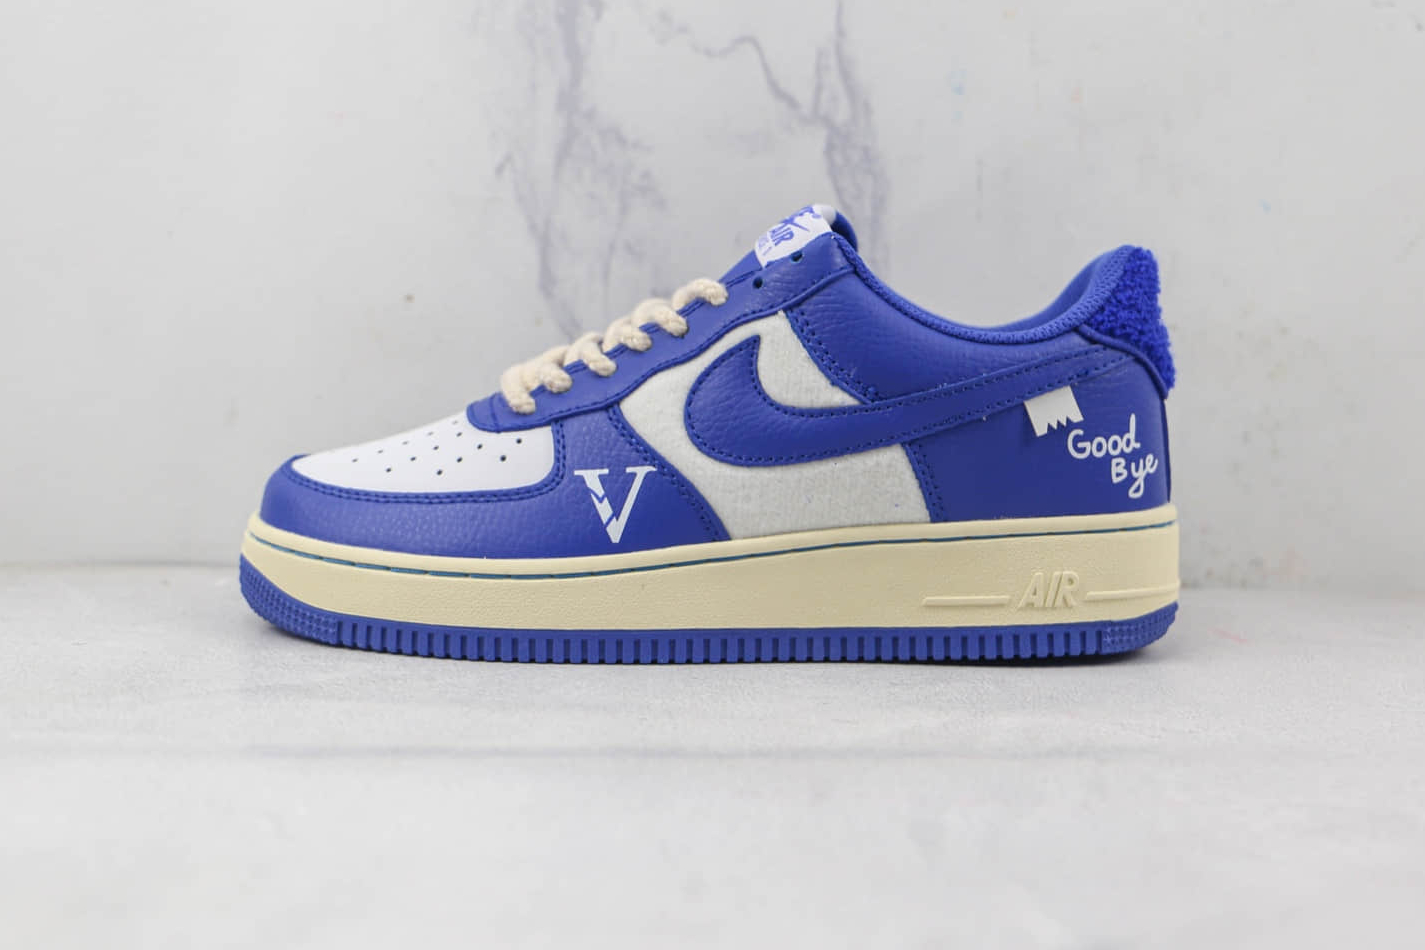 Air Force 1 07 LV8 “Goodbye 82” Blue White - Classic Sneakers for Style and Comfort